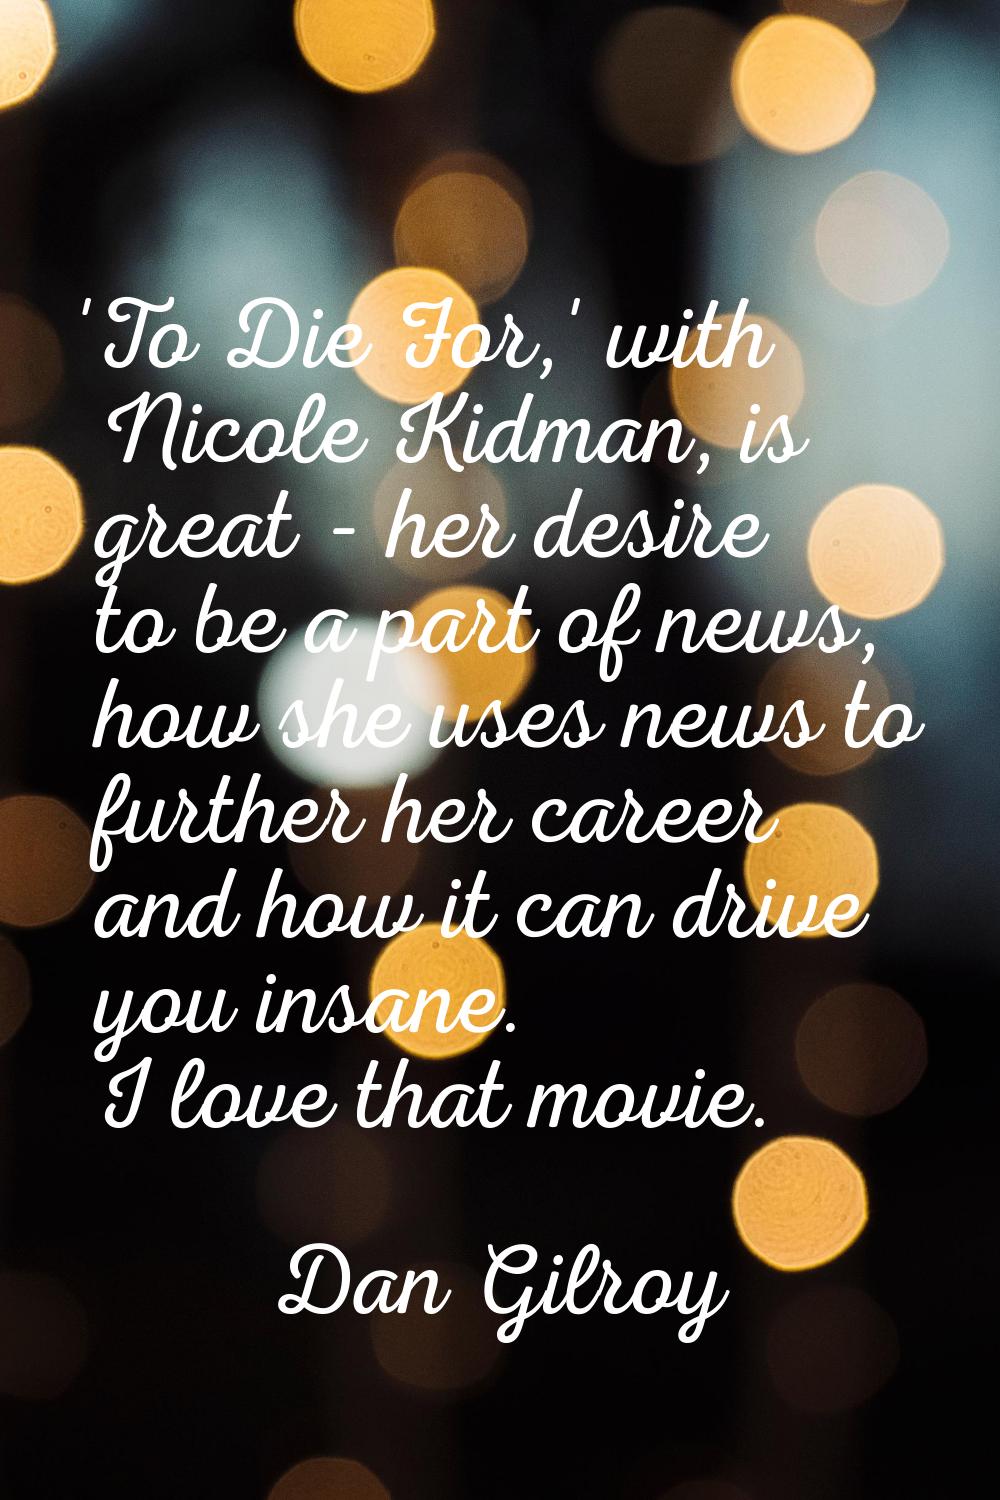 'To Die For,' with Nicole Kidman, is great - her desire to be a part of news, how she uses news to 